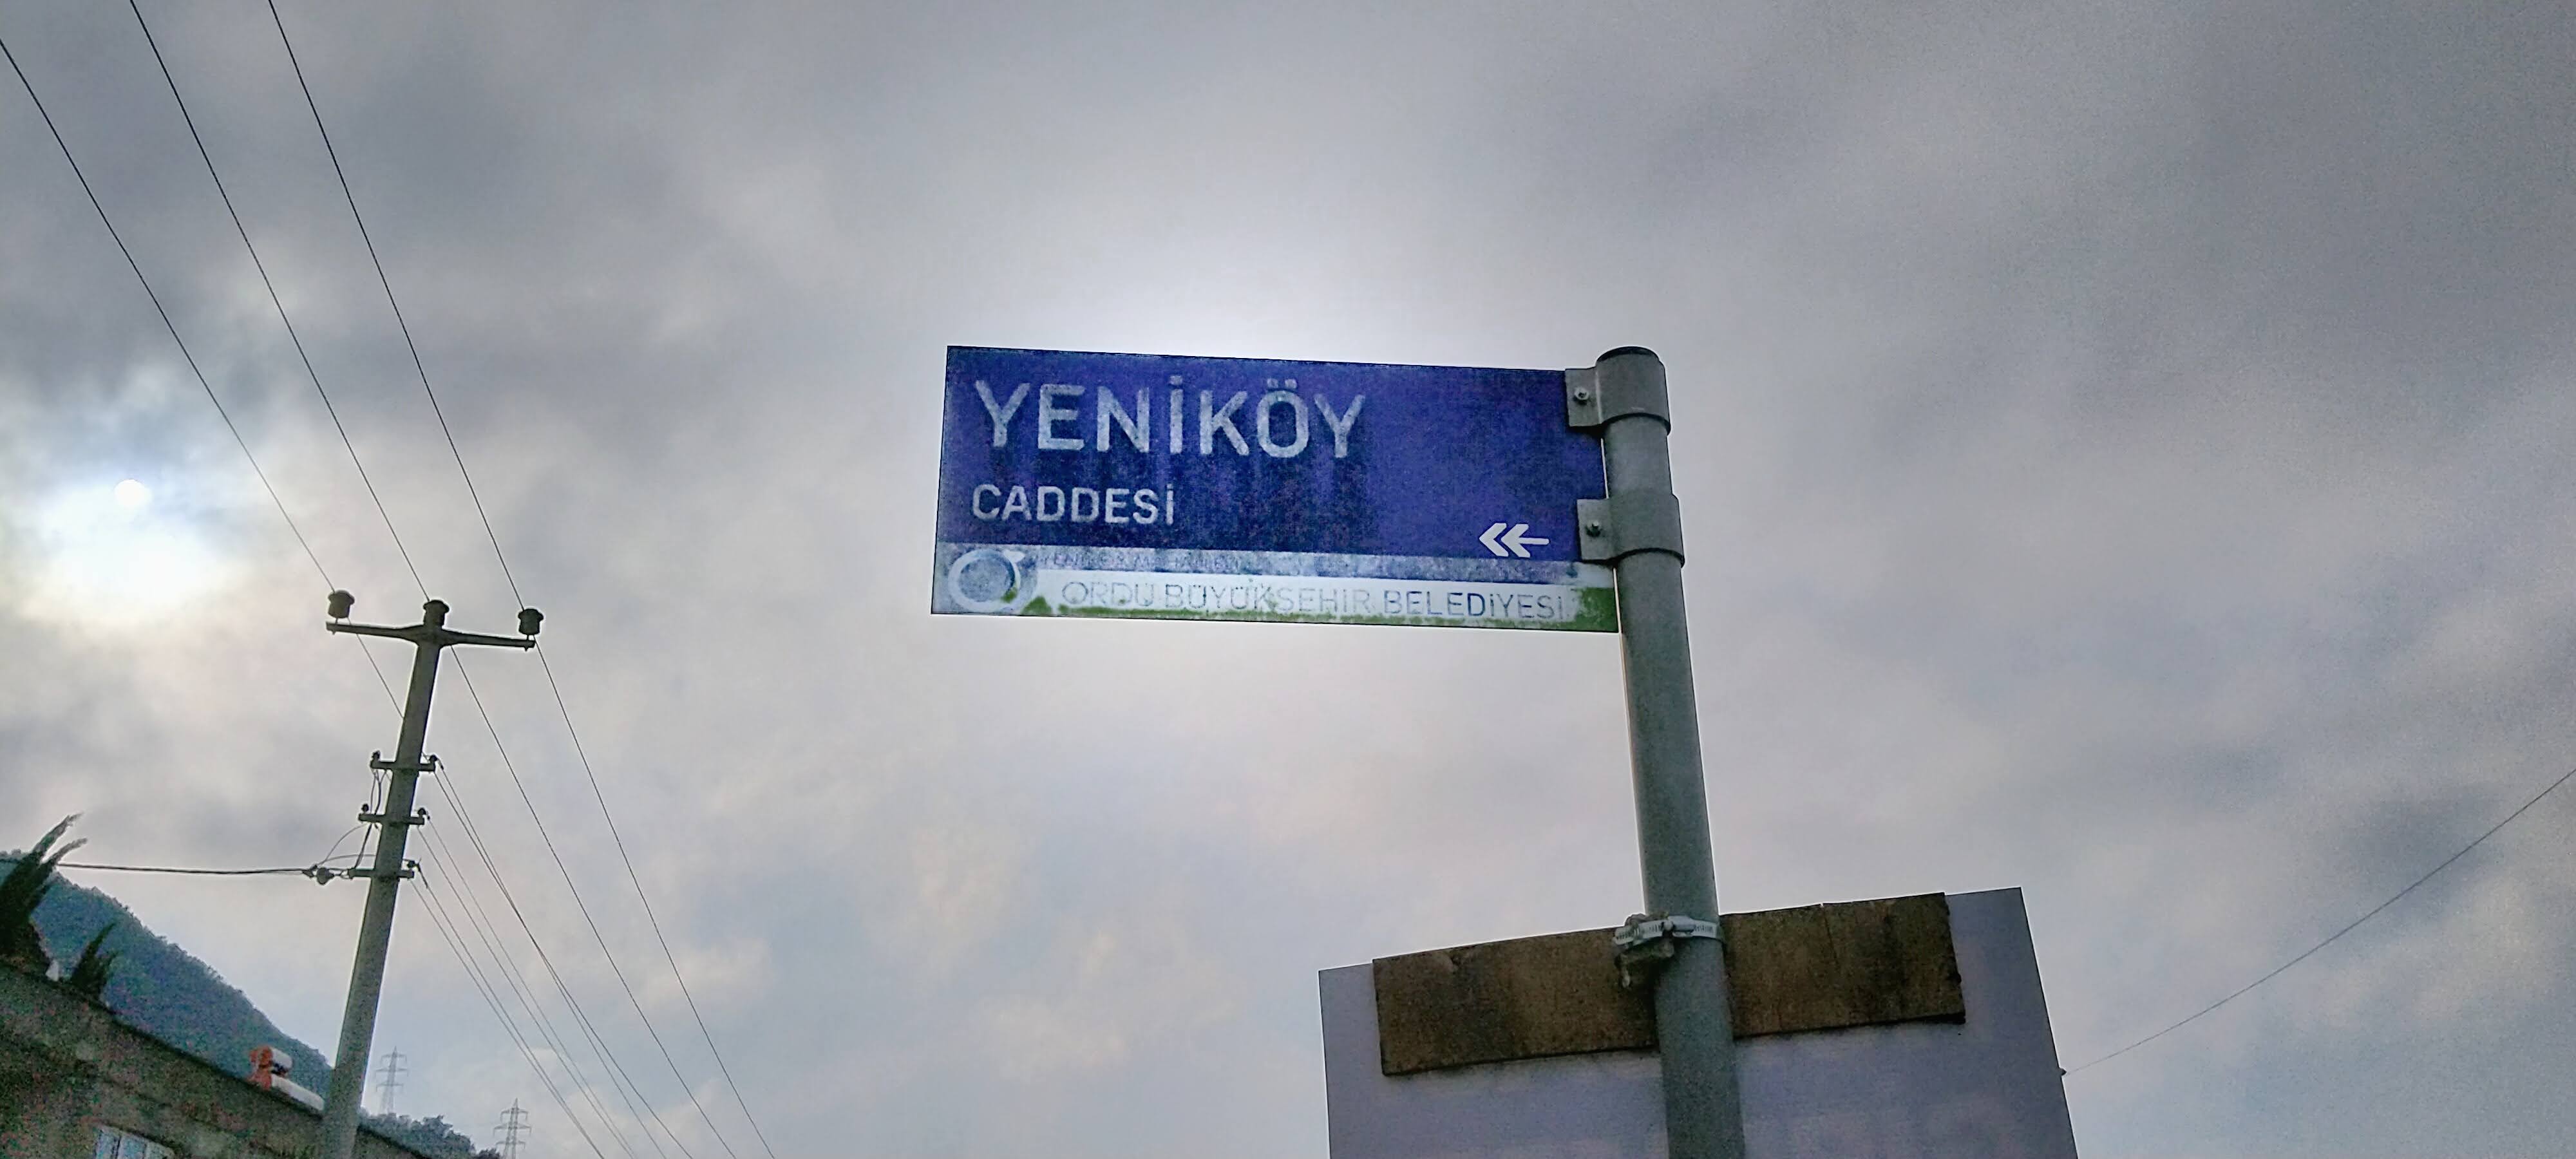 Old, fading street sign, with text Yeniköy Caddesi ↞ and the logo of the Metropolitan Municipality of Ordu.